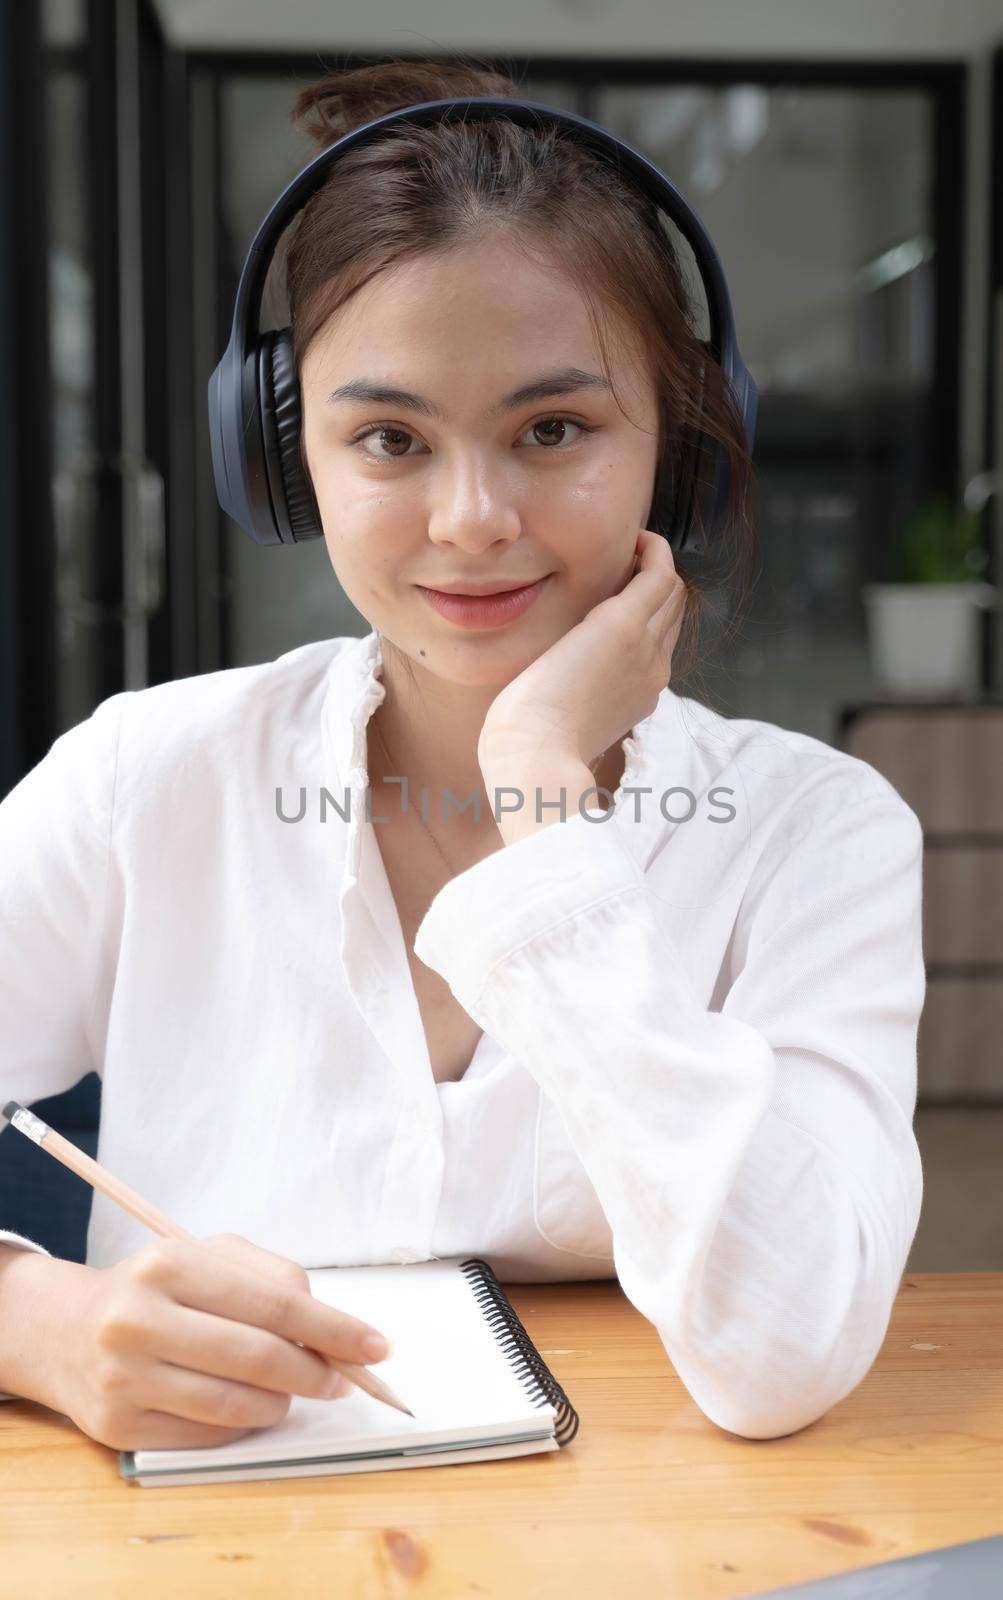 Image of a young woman studying online using a tablet. Looking at the camera. by wichayada